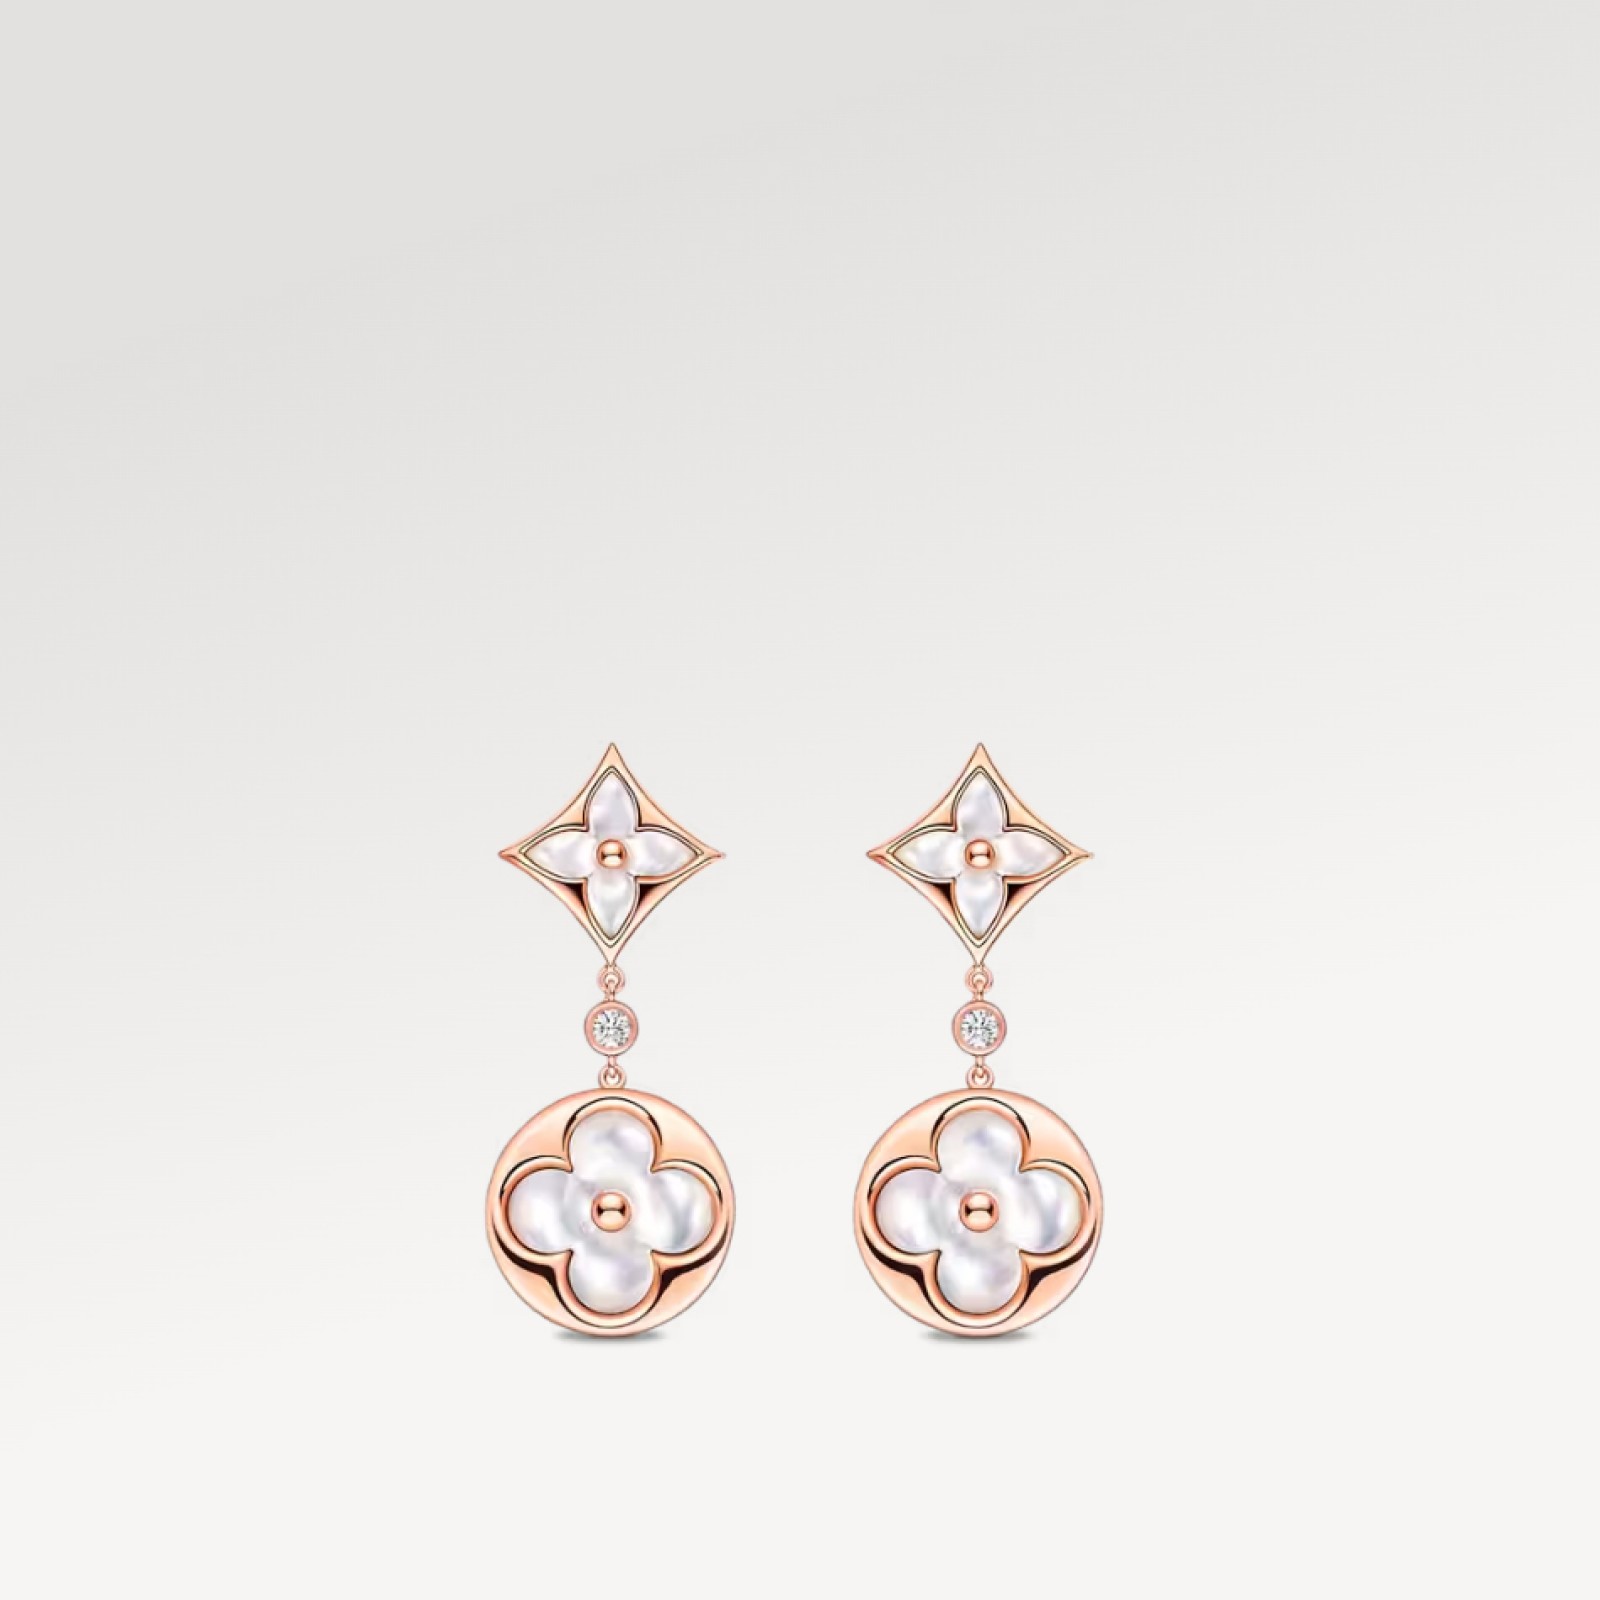 Color Blossom Long Earrings, Pink Gold, White Mother-Of-Pearl And Diamonds 